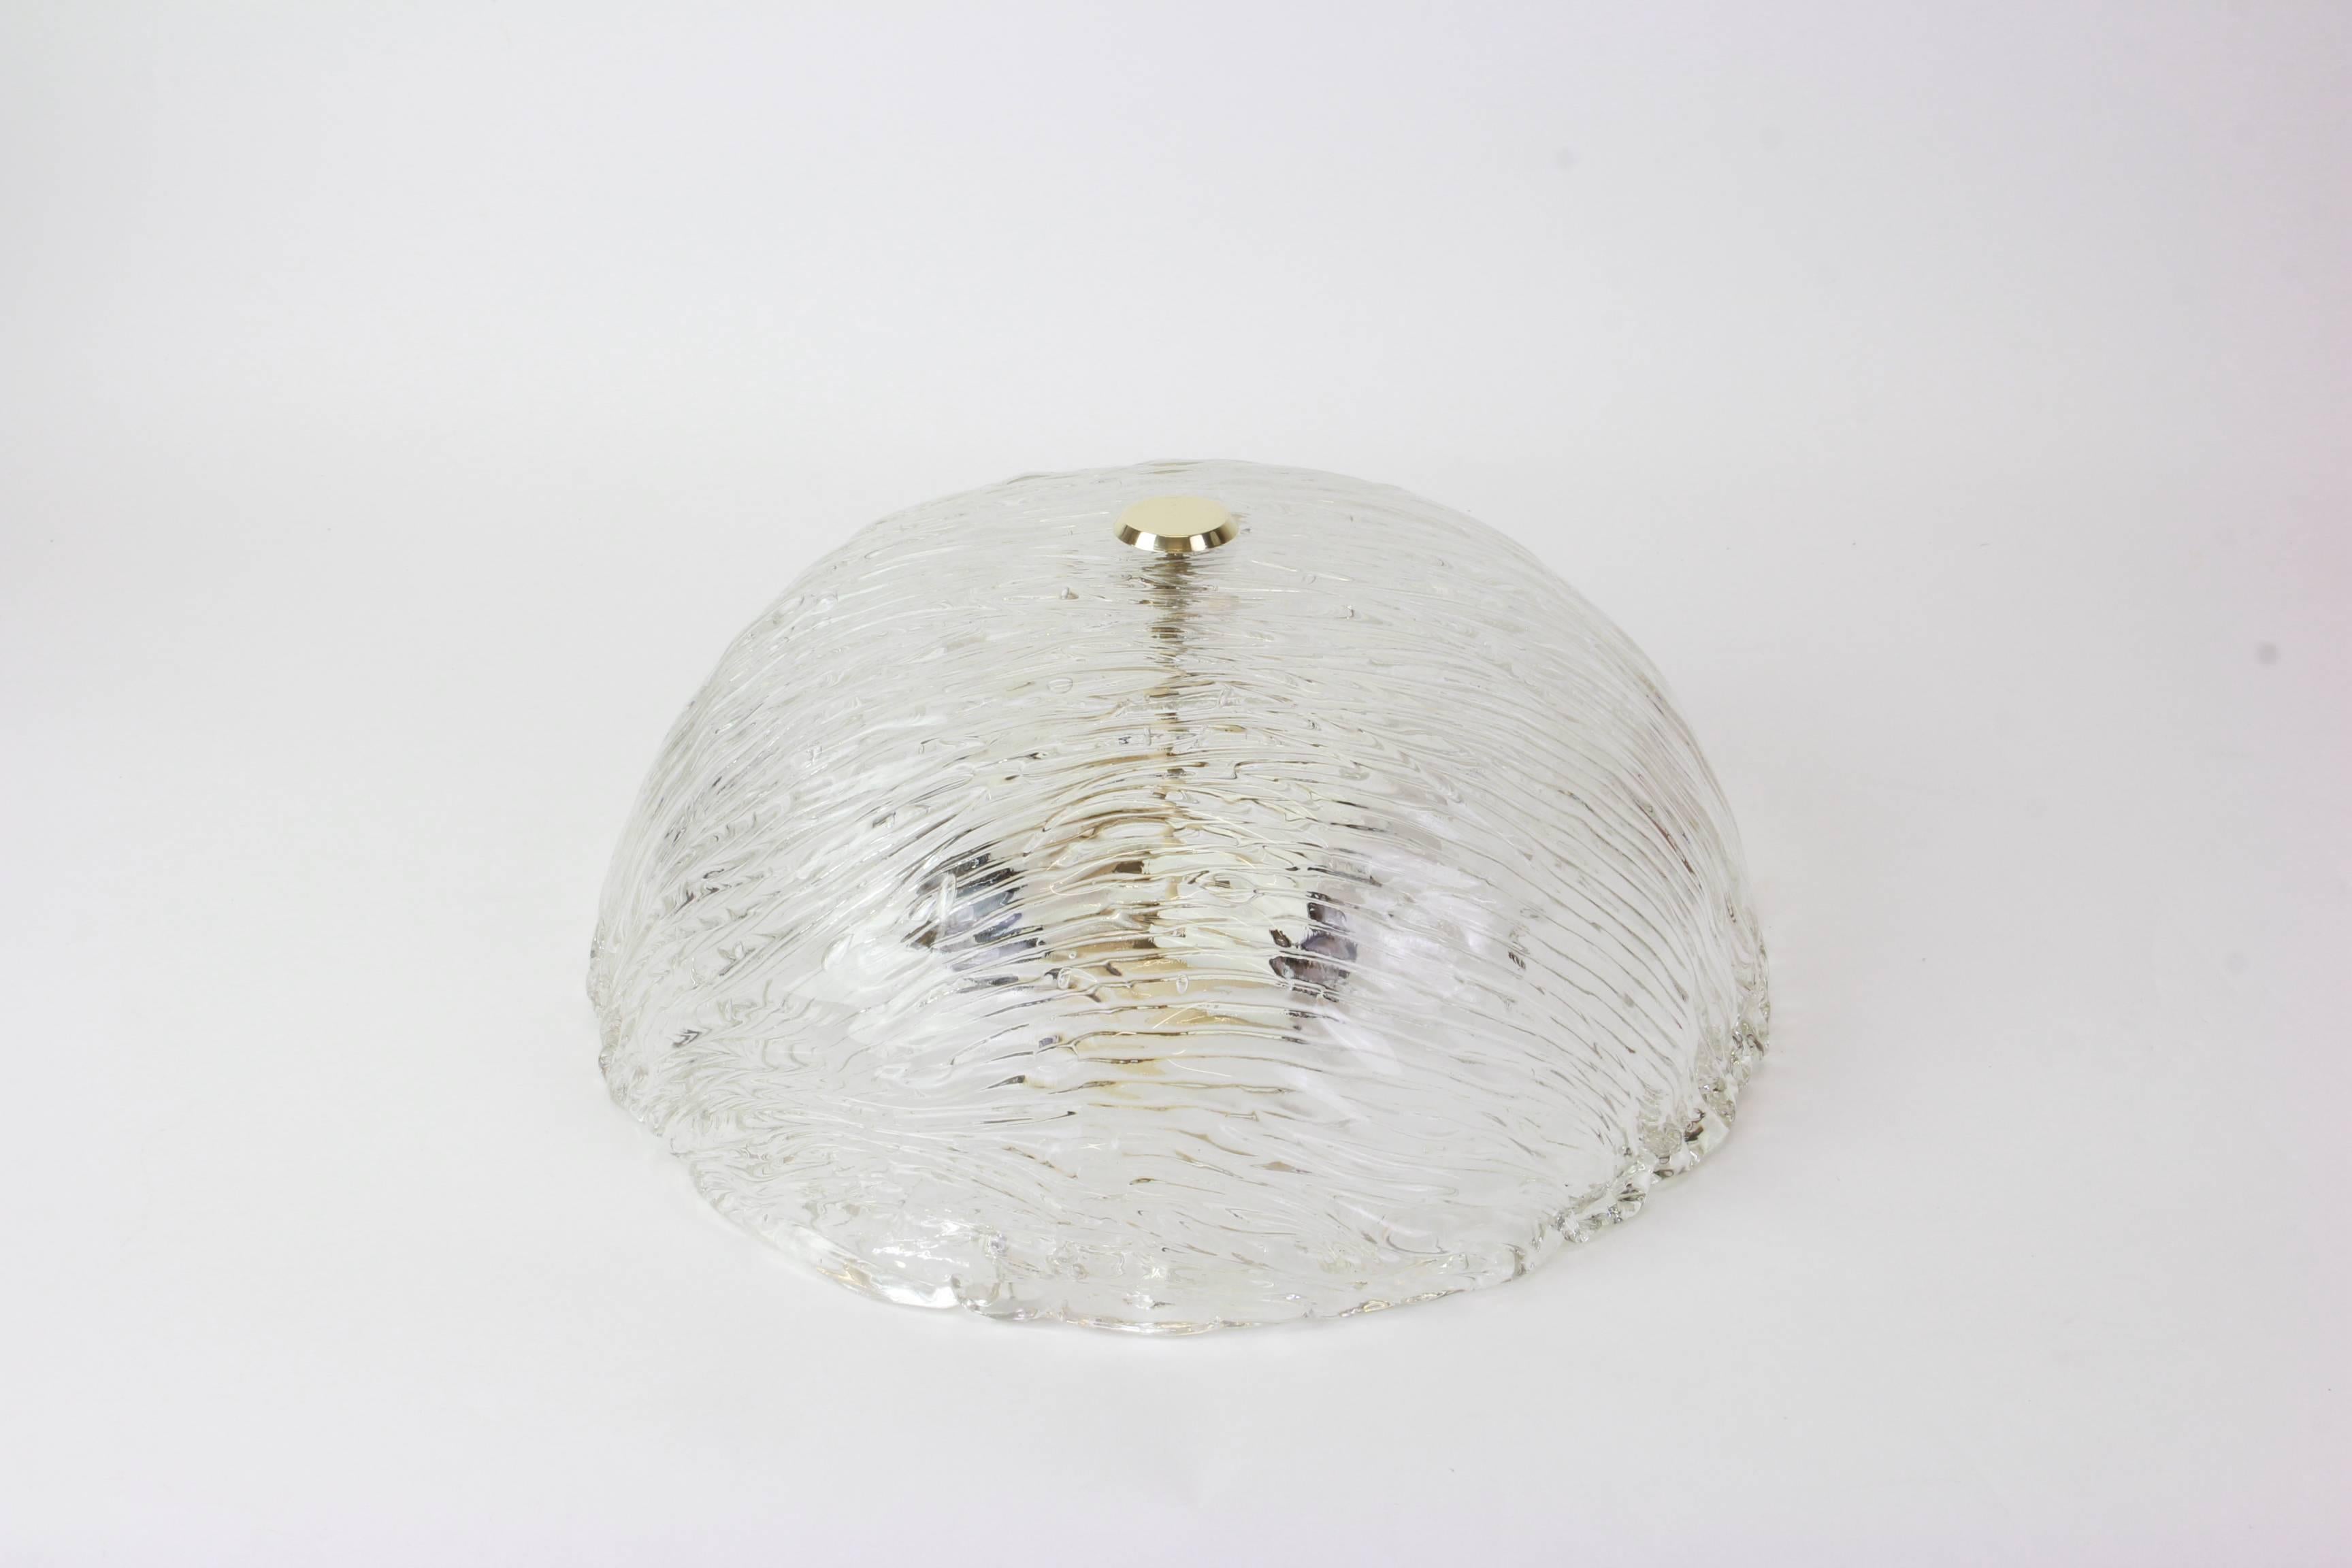 Mid-Century Modern Venini Ceiling Lights Attributed to Carlo Scarpa for Venini, 1950s For Sale